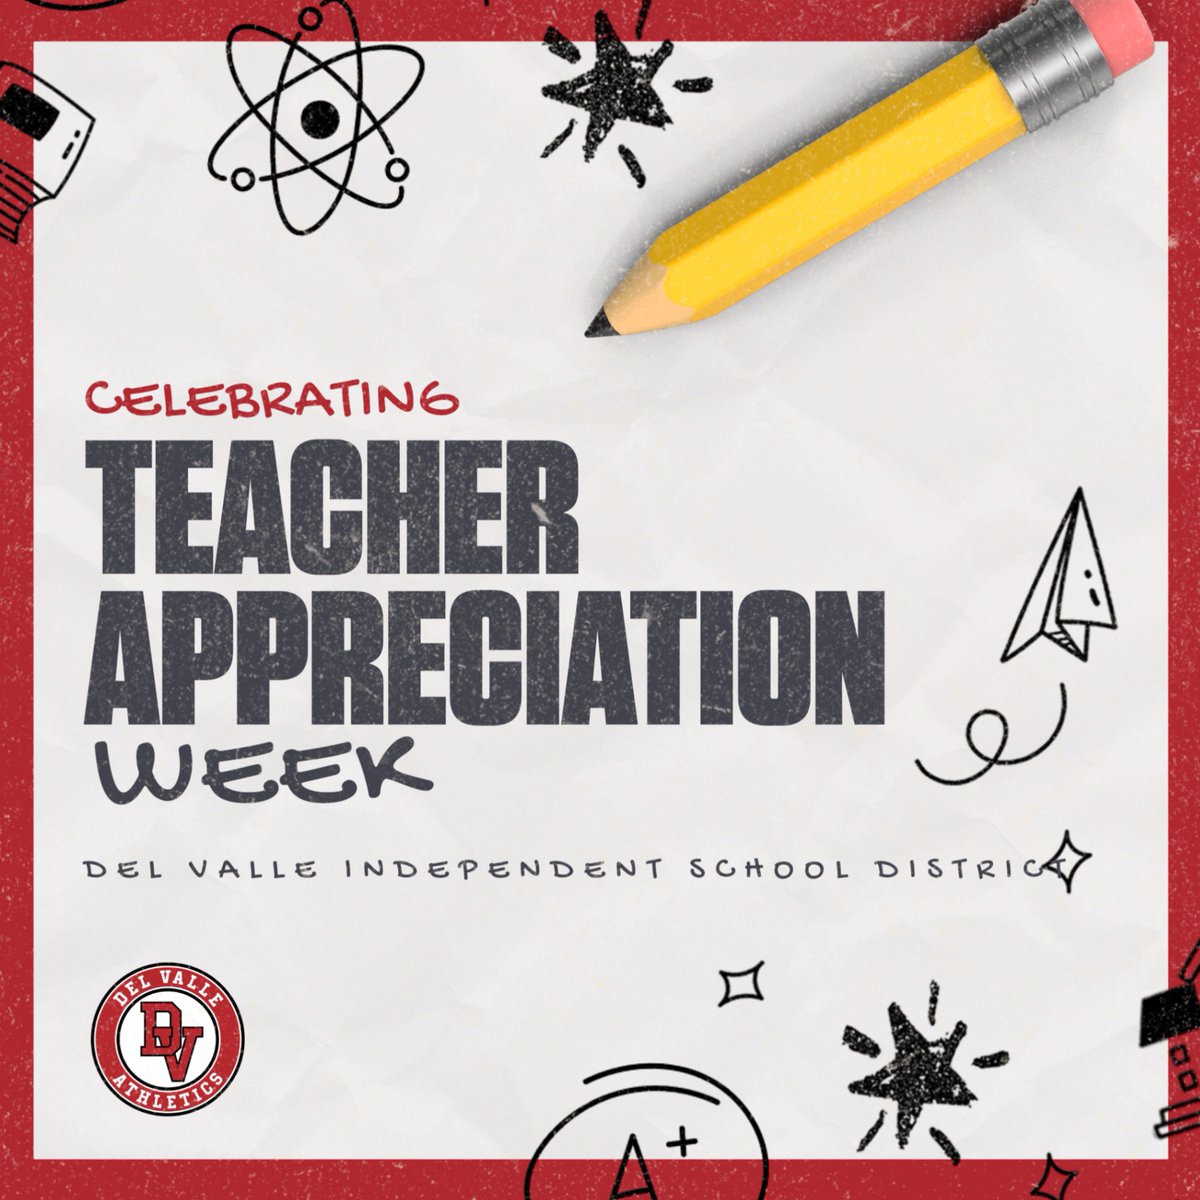 Happy Teacher Appreciation Week to all @DelValleISD teachers and coaches! Thank you for your work and dedication to our profession and for pouring into our amazing students!